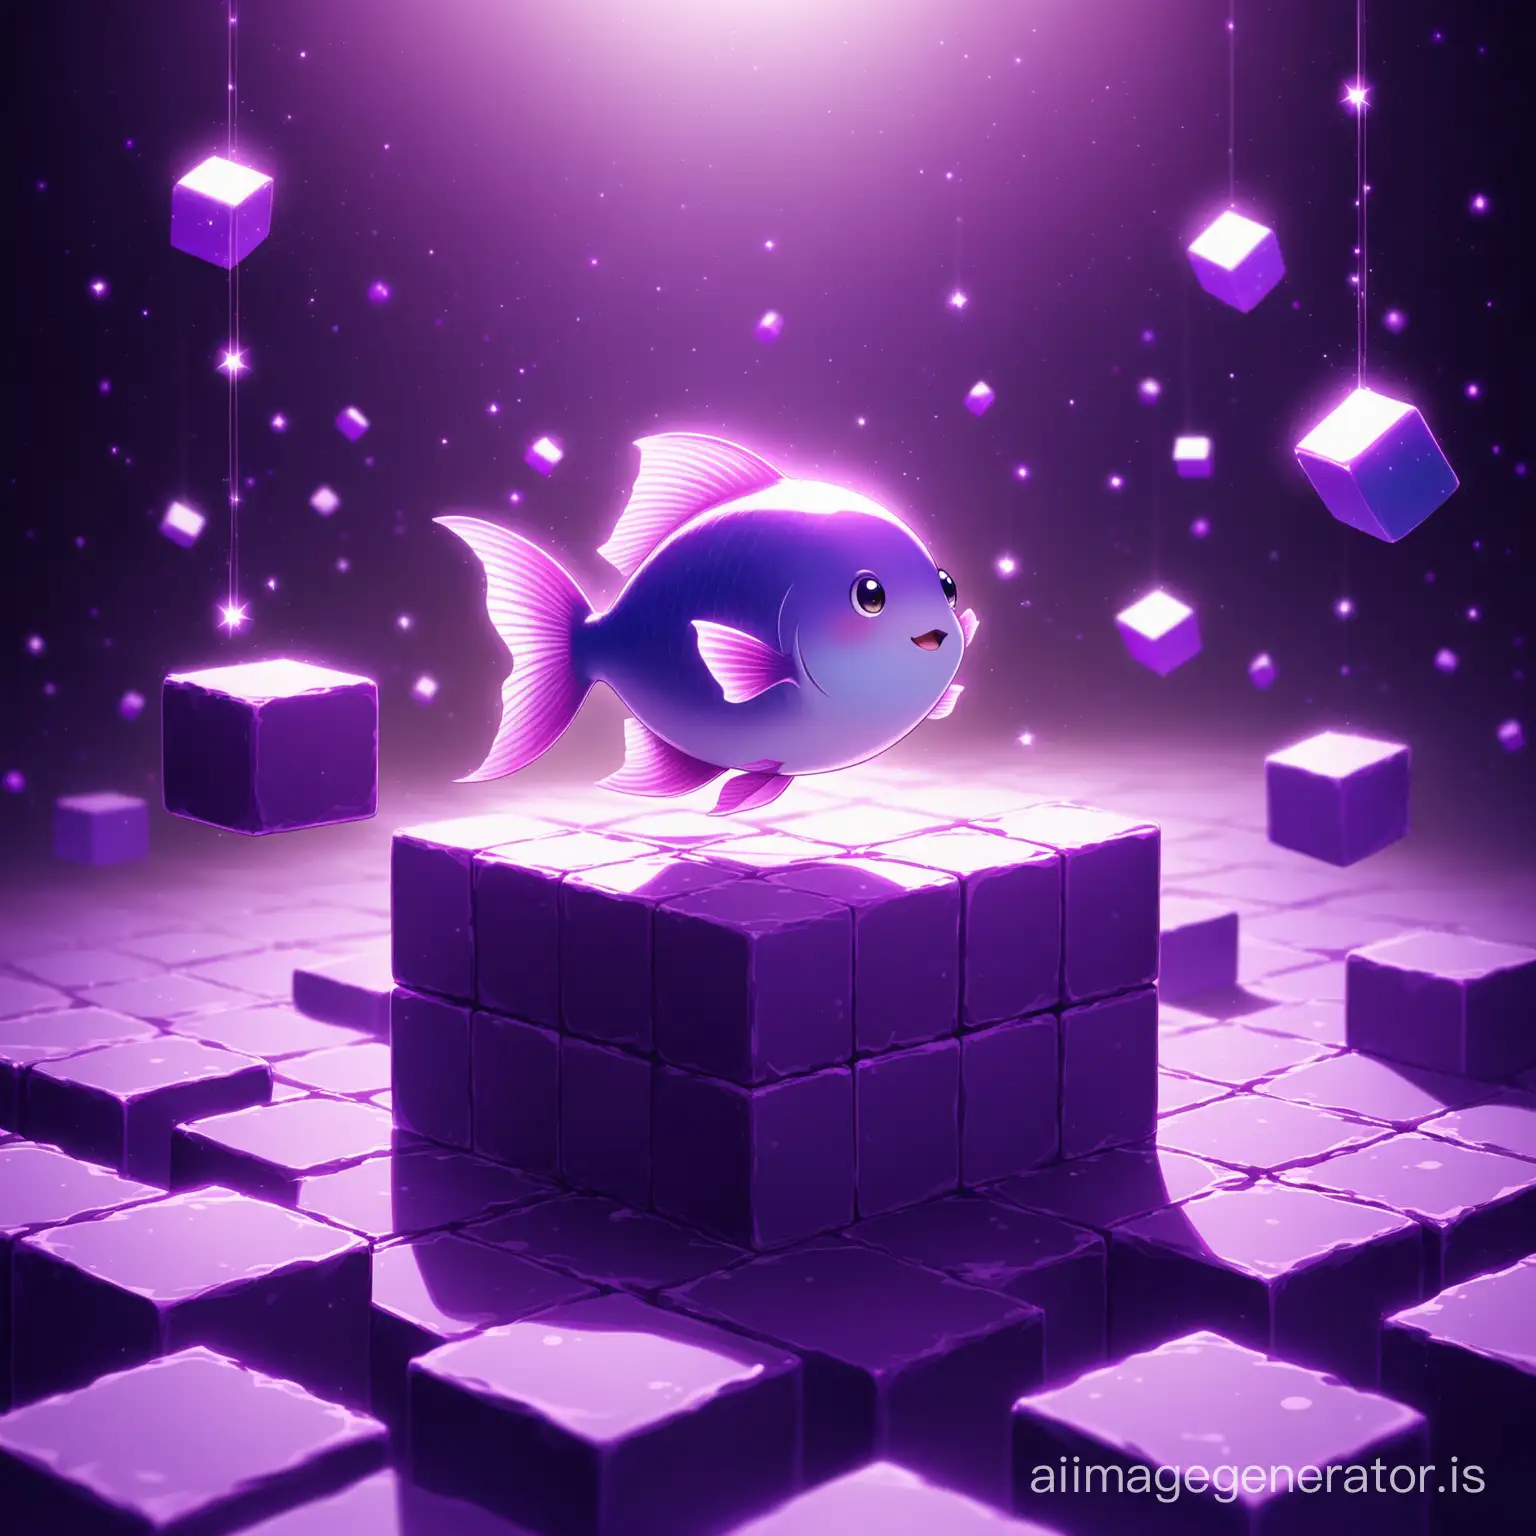 A little happy cute fish flying on the purple block earth with super detail and High Quality
big and Purple and floating blocks are seen everywhere
Details are evident beautifully and with great precision
Lighting is carefully observed
